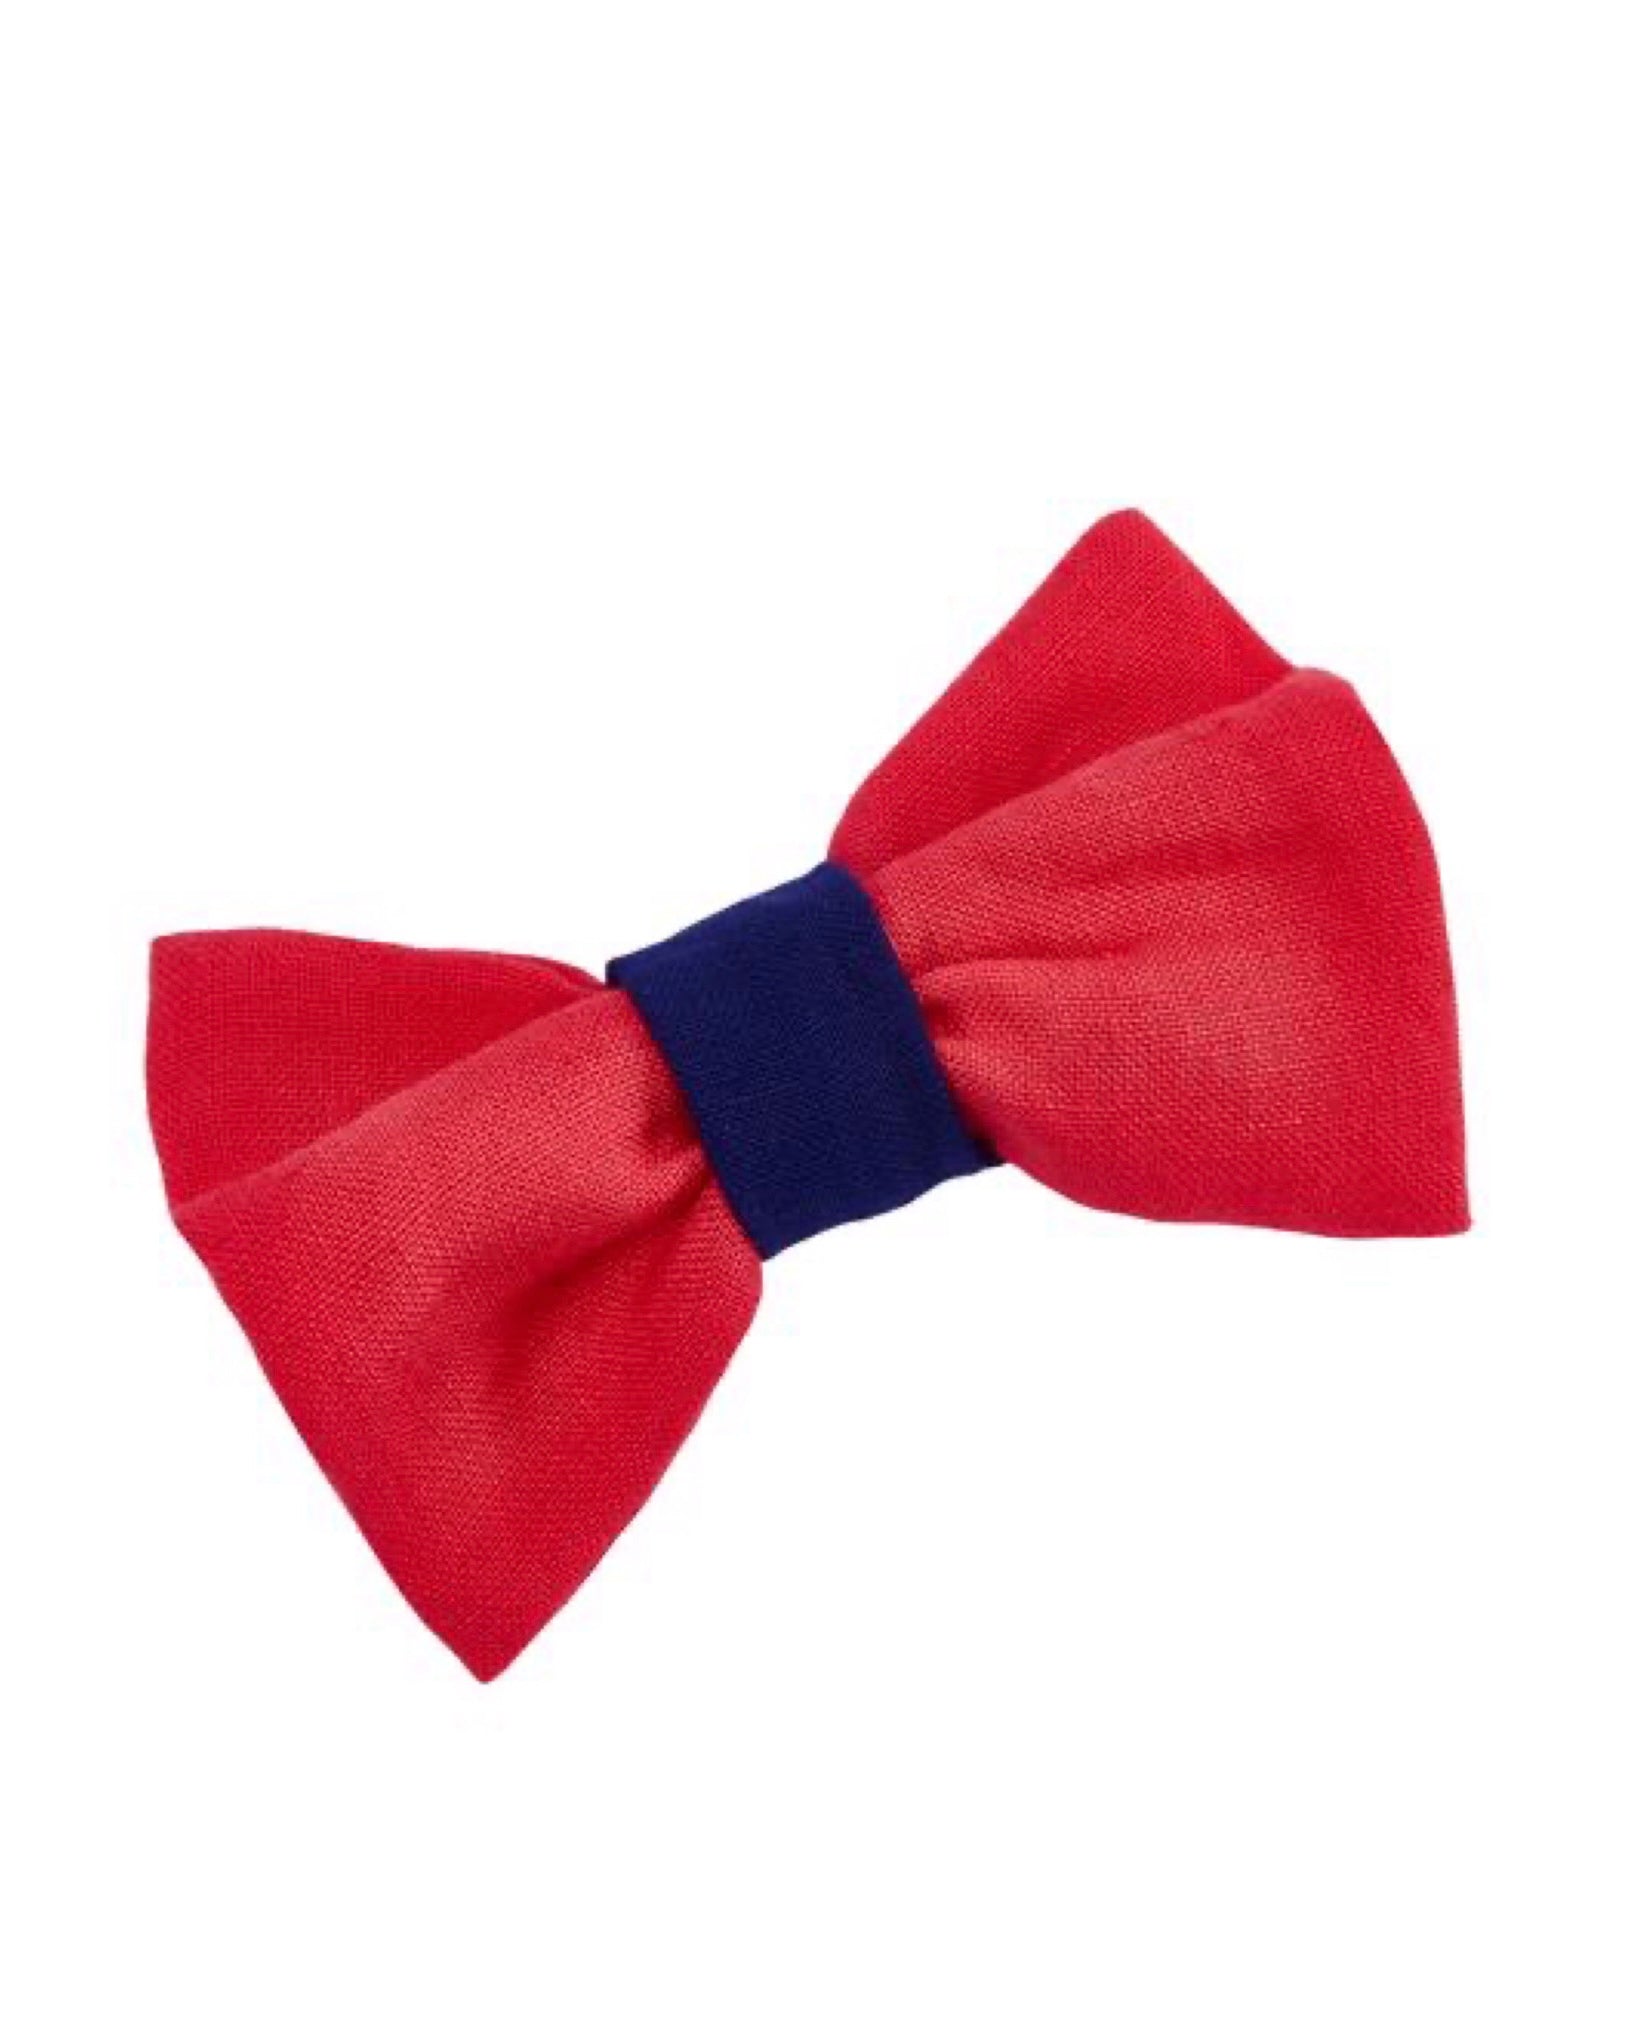 LISH Dibden Linen Bow Tie - Scarlet and Blue